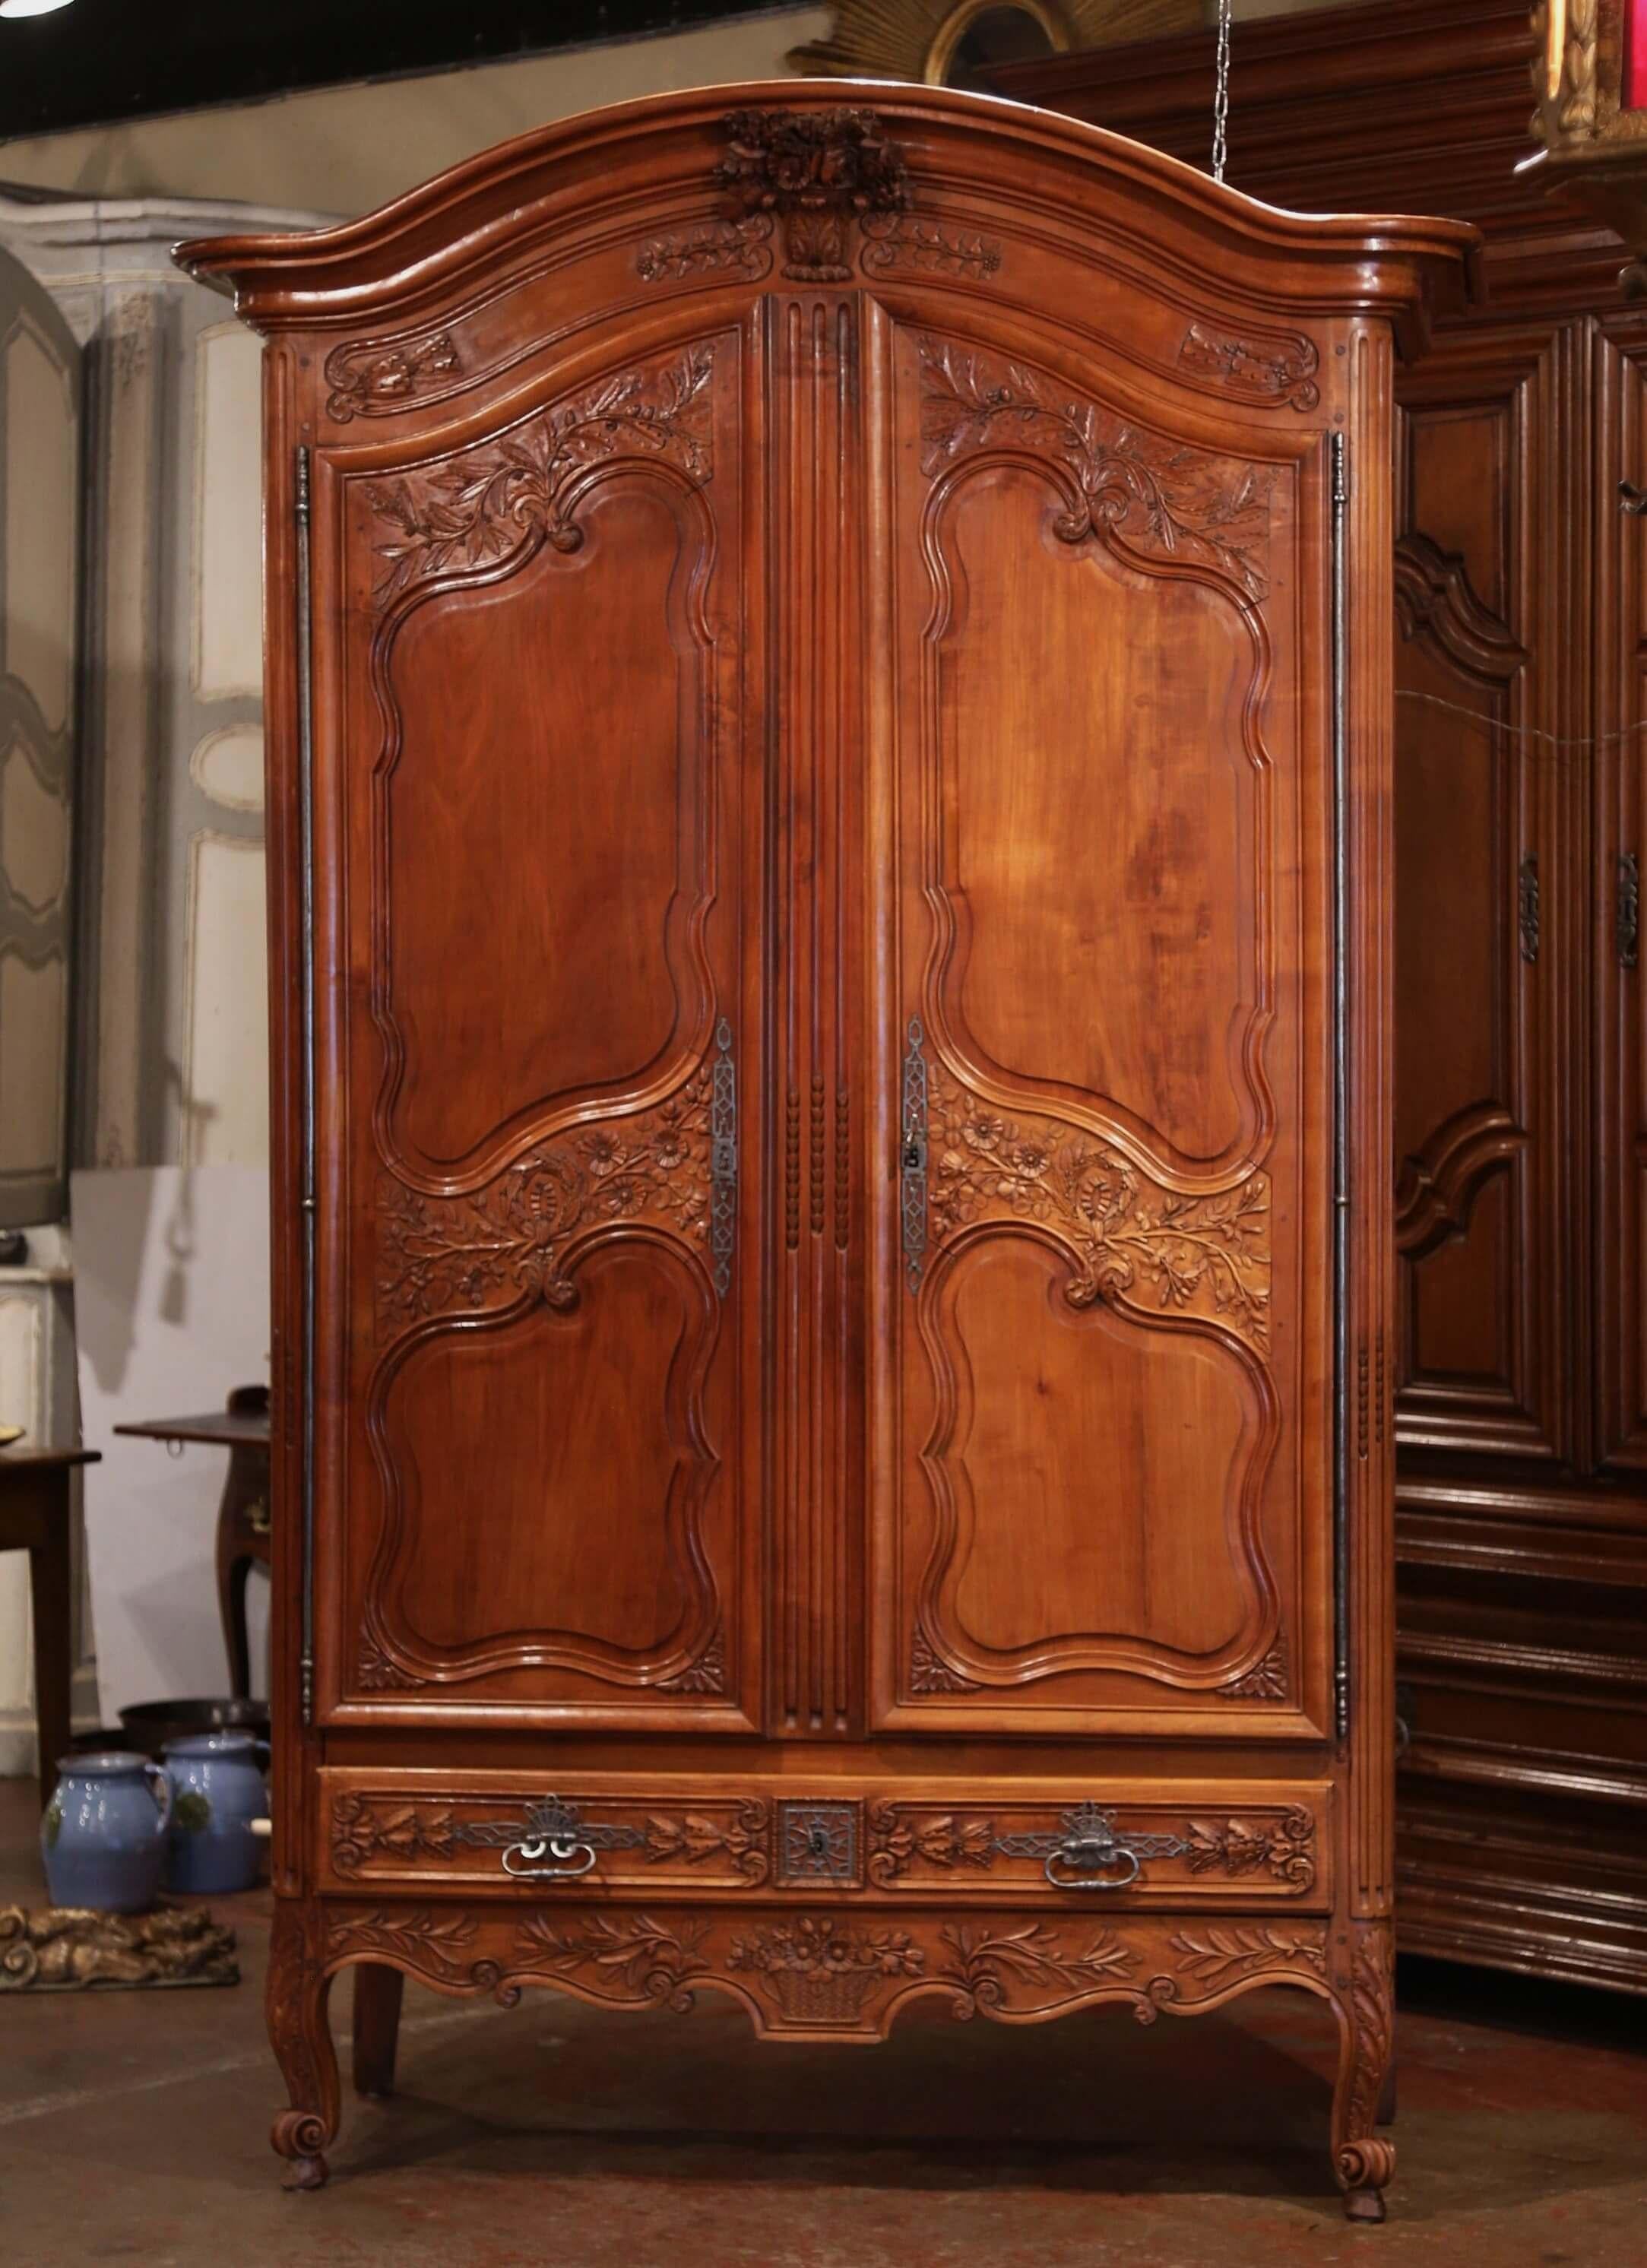 This important and elegant antique armoire was crafted in the Poitou region of France, circa 1770. The tall fruitwood cabinet stands on cabriole legs ending with escargot feet, and features a molded bonnet top over a fine carved center basket of